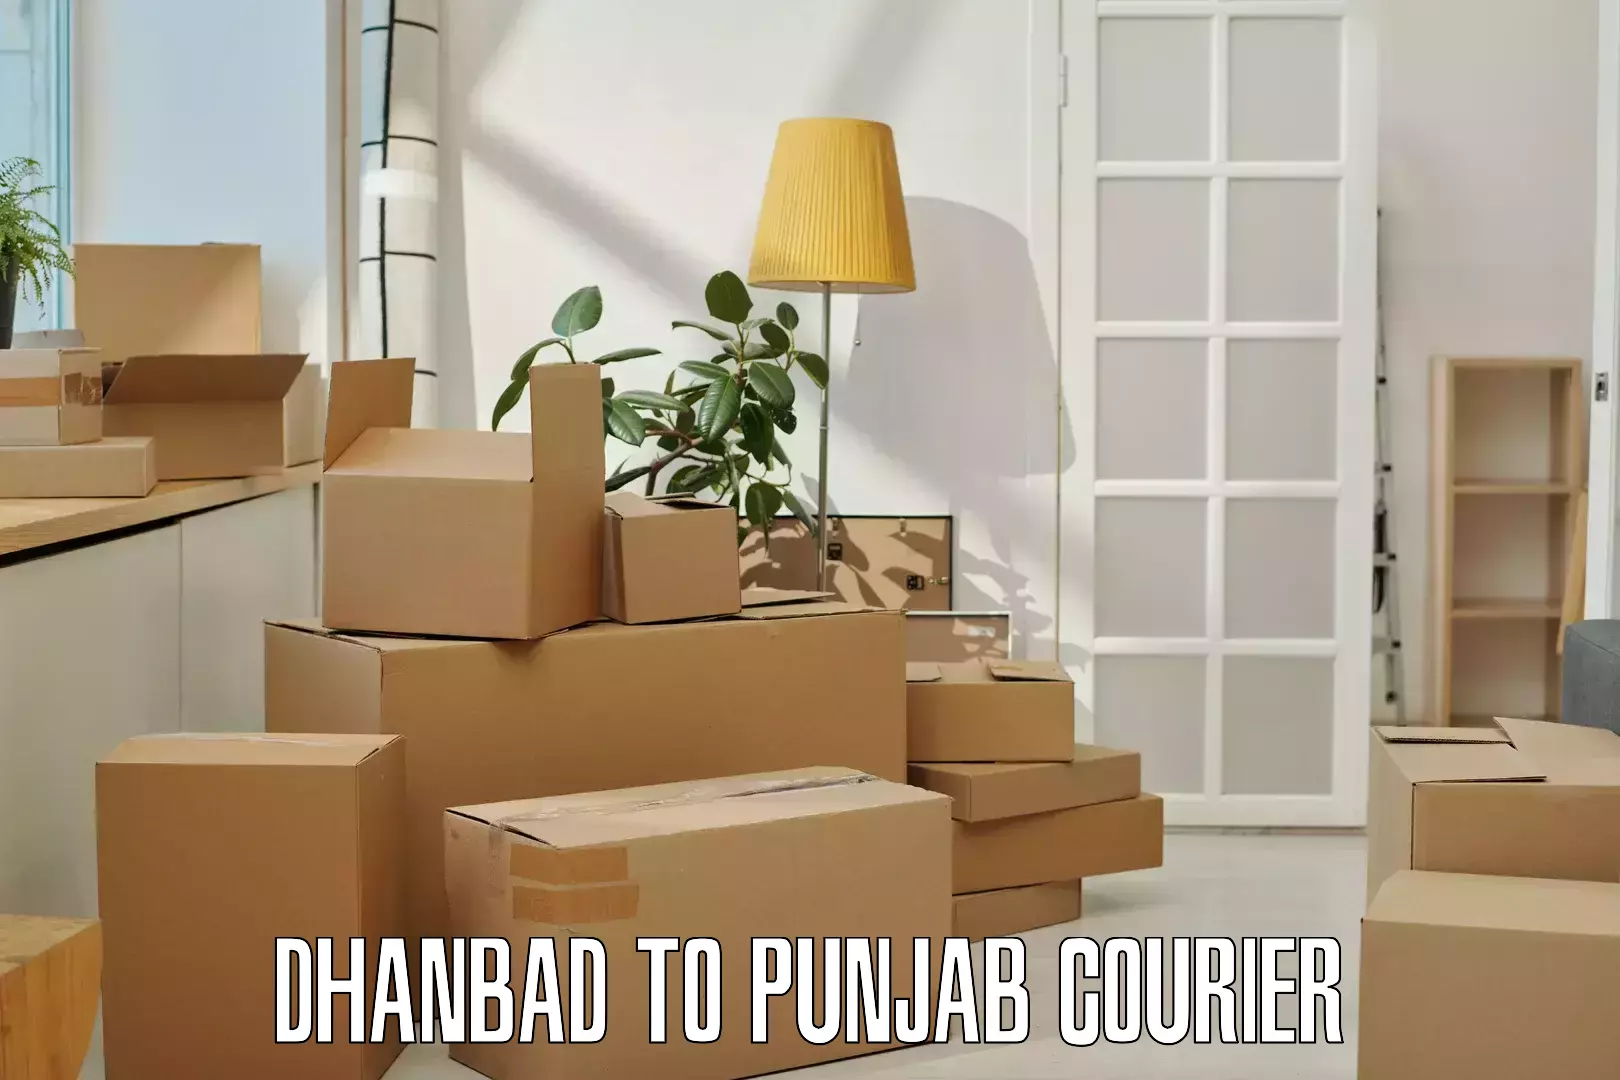 Full-service courier options Dhanbad to Dinanagar